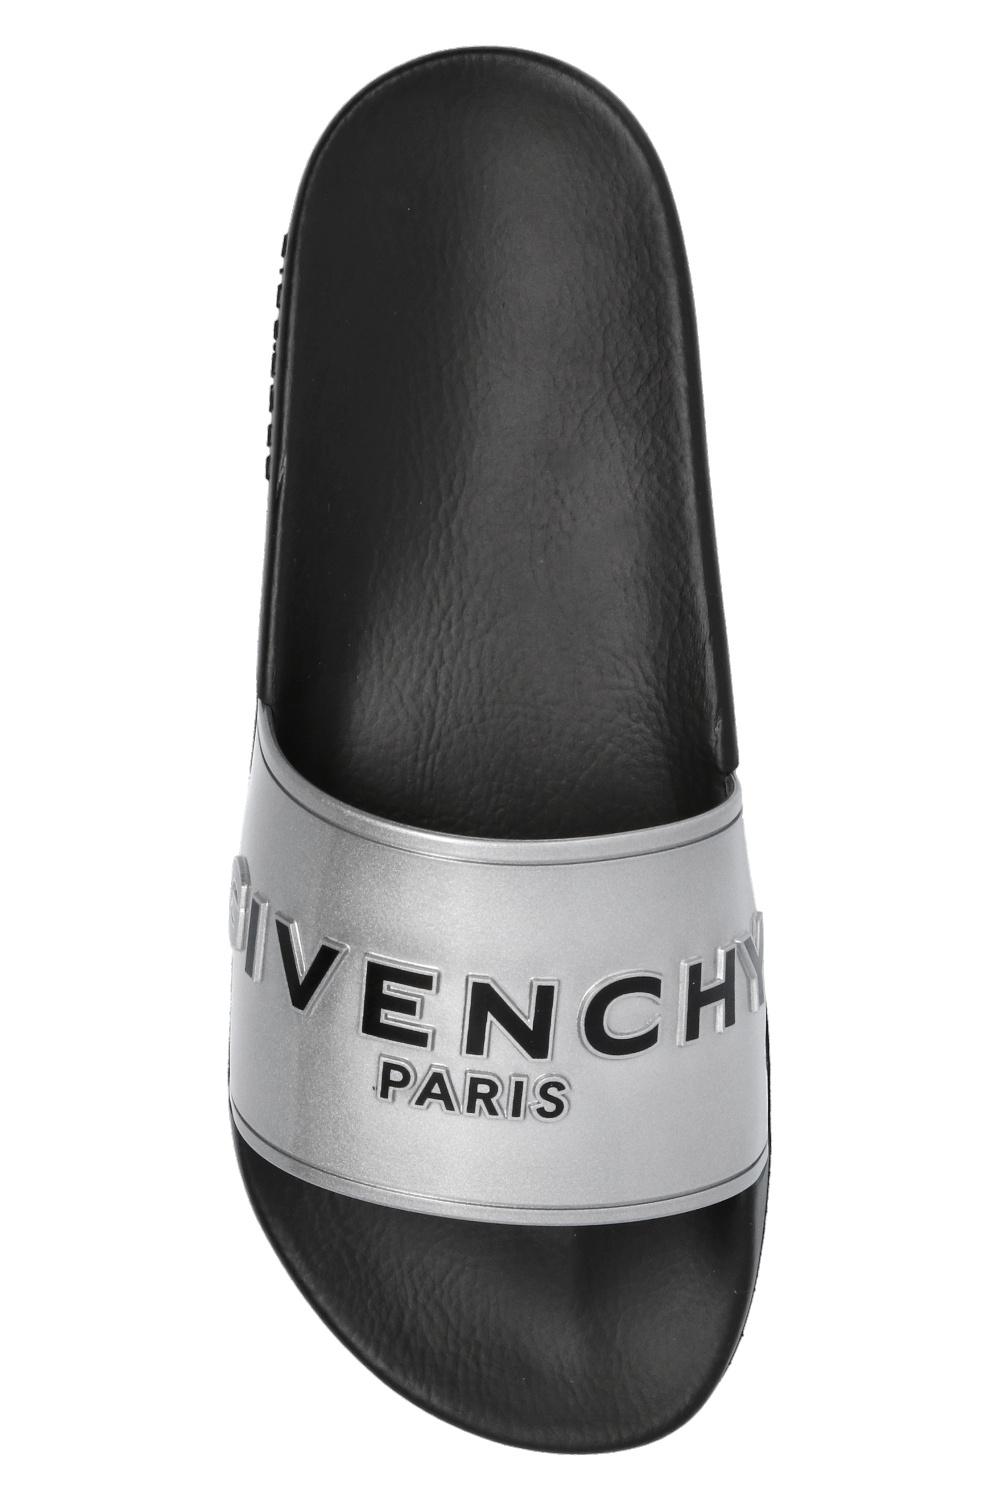 Givenchy Logo Slides in Silver (Metallic) for Men - Lyst